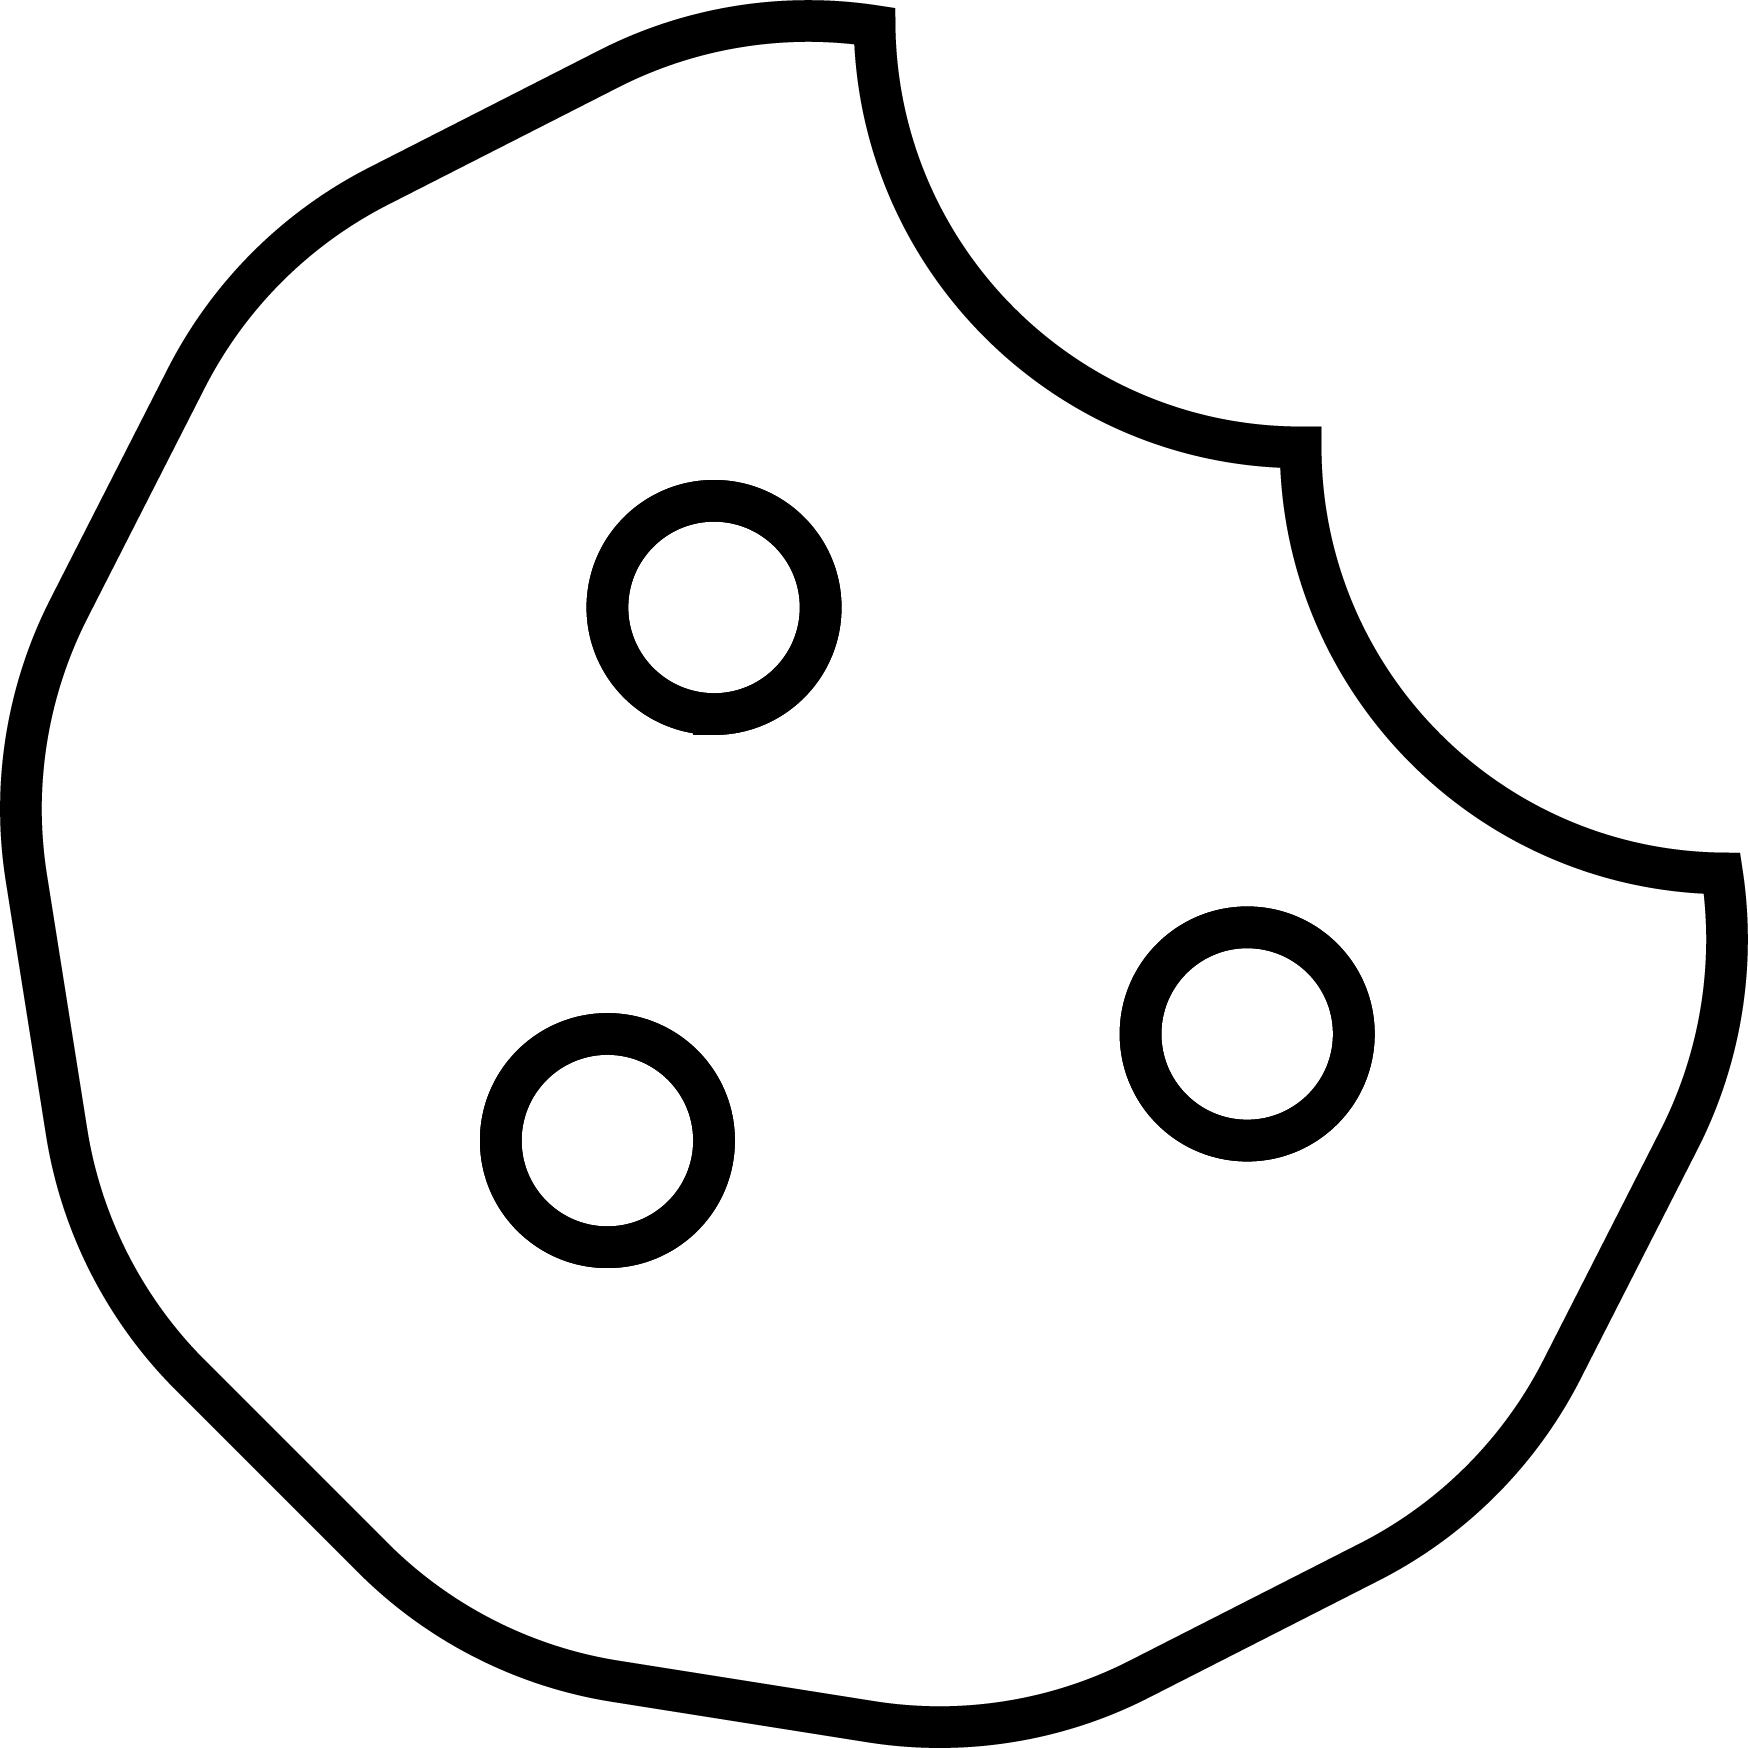 black line drawing icon of a cookie with two bites out of it, representing CTC use of cookies